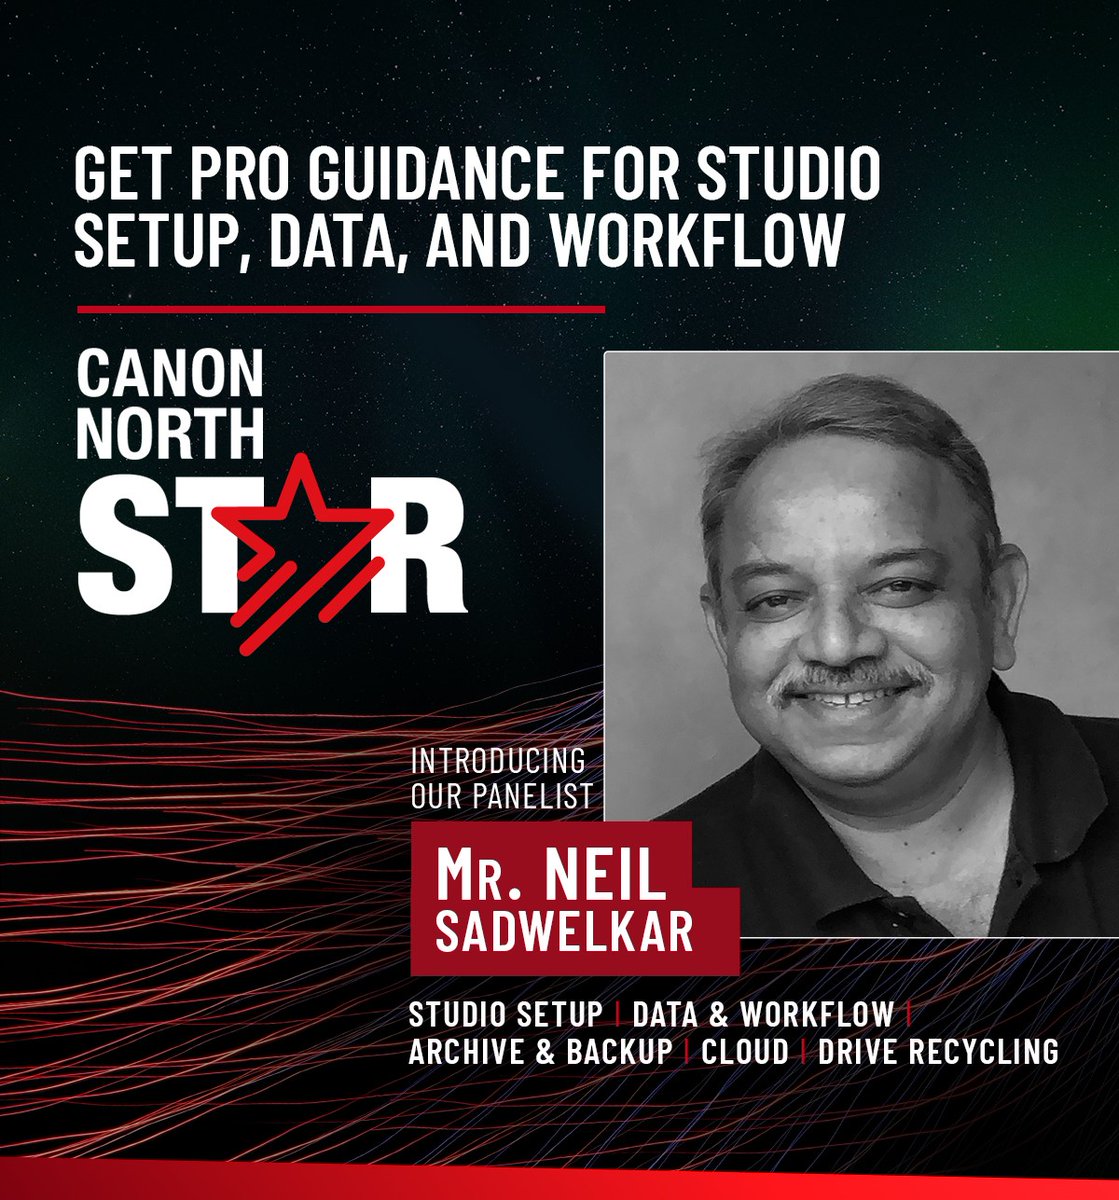 Introducing Neil Sadwelker, the Canon North Star panellist. He is your go-to guru for setting up edit studios, data solutions, colour grading setups, cinemas, post-production, sound, and VFX facilities. With an extensive portfolio in managing data and workflow for projects like…